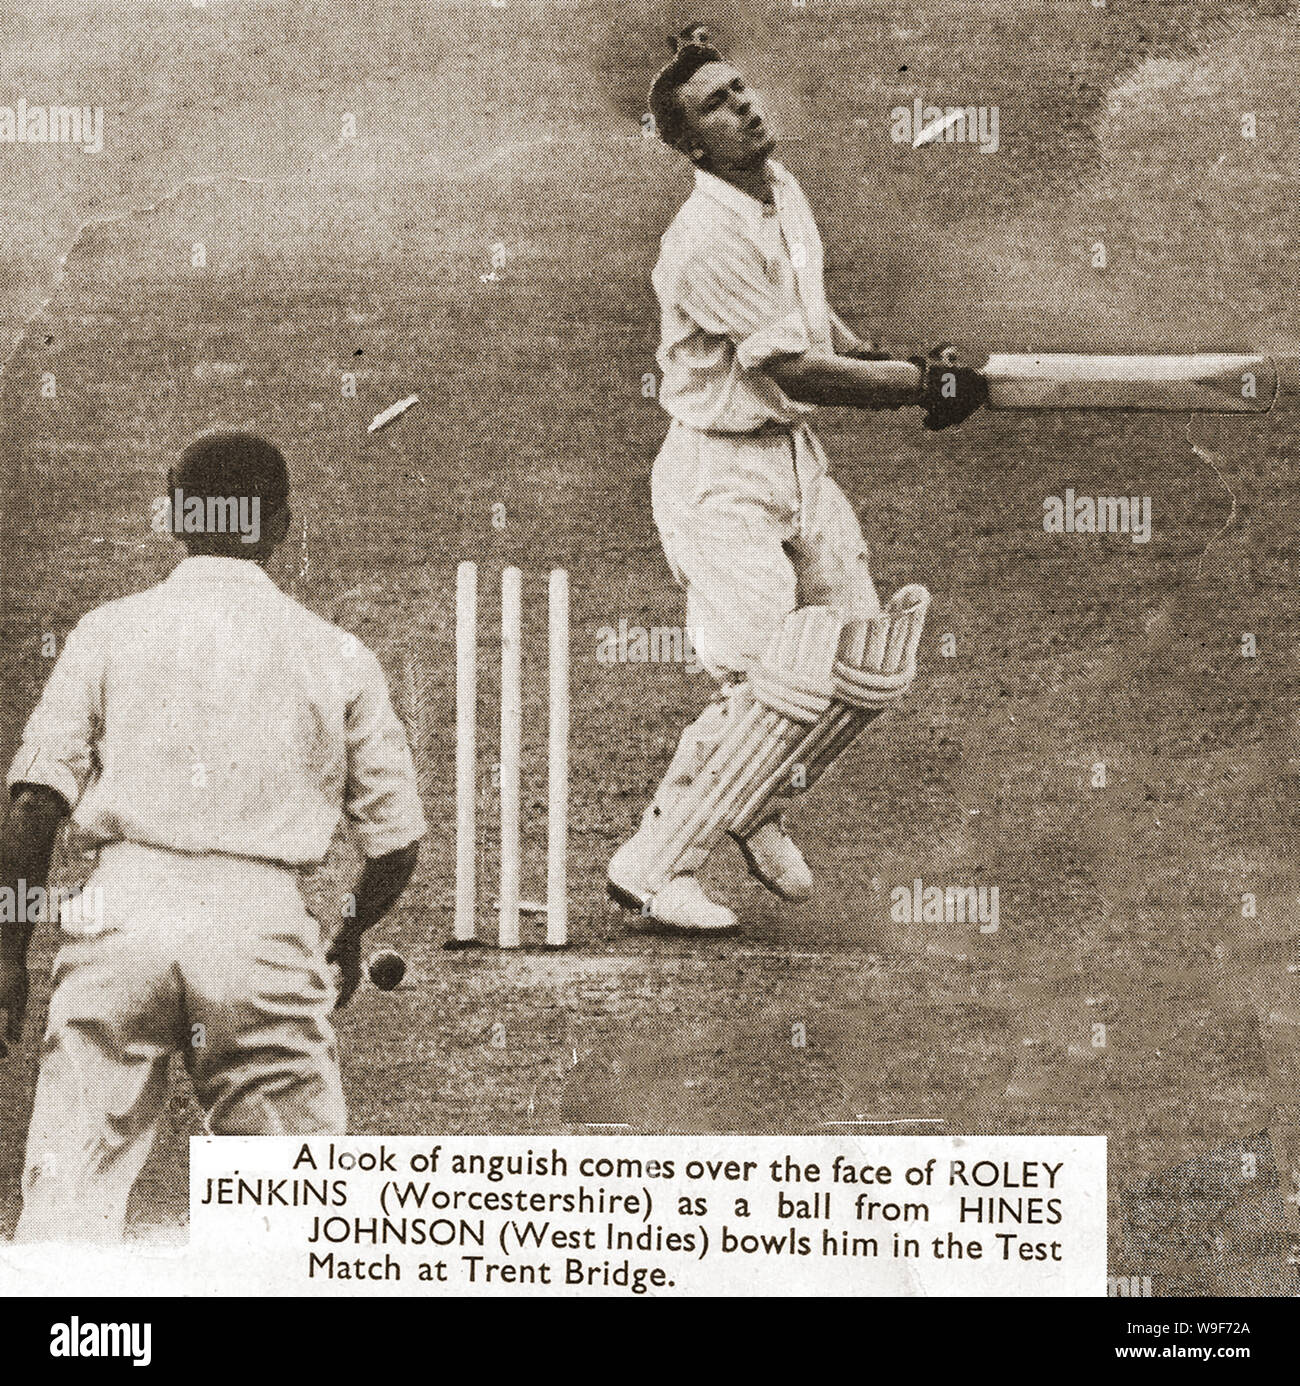 English Cricket 1950 season - A newspaper picture of  Roley Jenkins (Worcestershire) being bowled out by Hines Johnson (West Indies) in the Test Match at Trent Bridge. Stock Photo